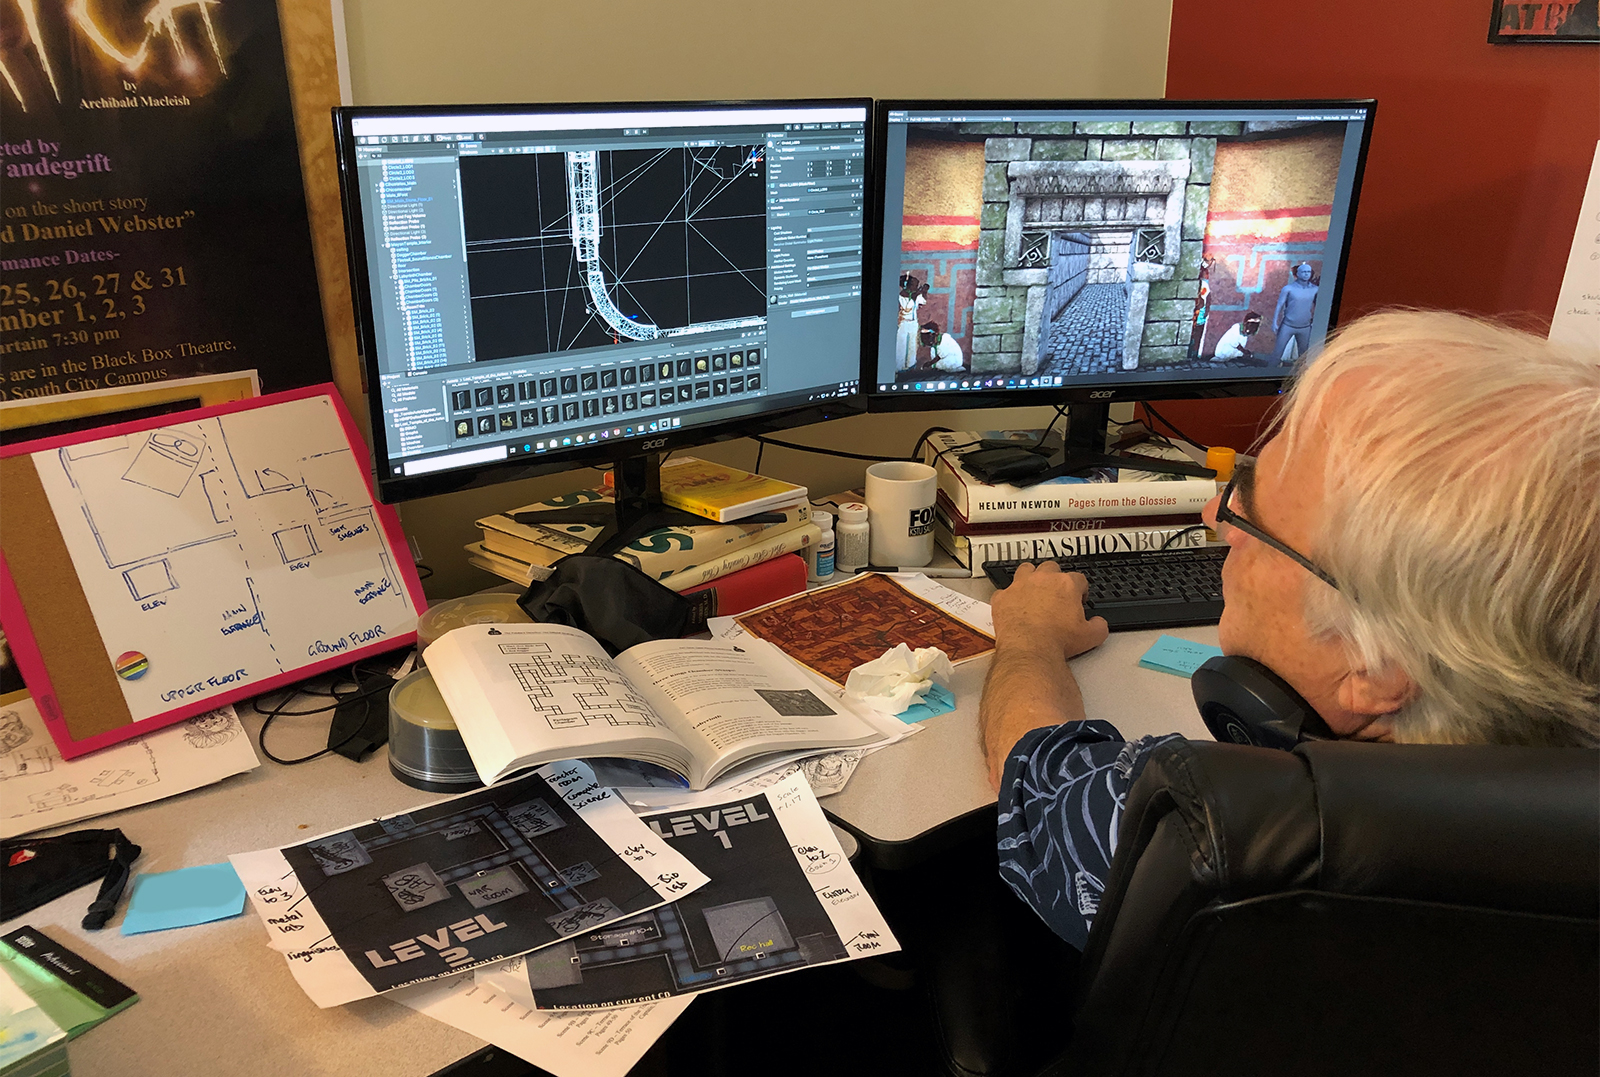 Over the shoulder photo of Doug Vandegrift working on level design. In this image, he is working on the Mayan Temple in Unity.